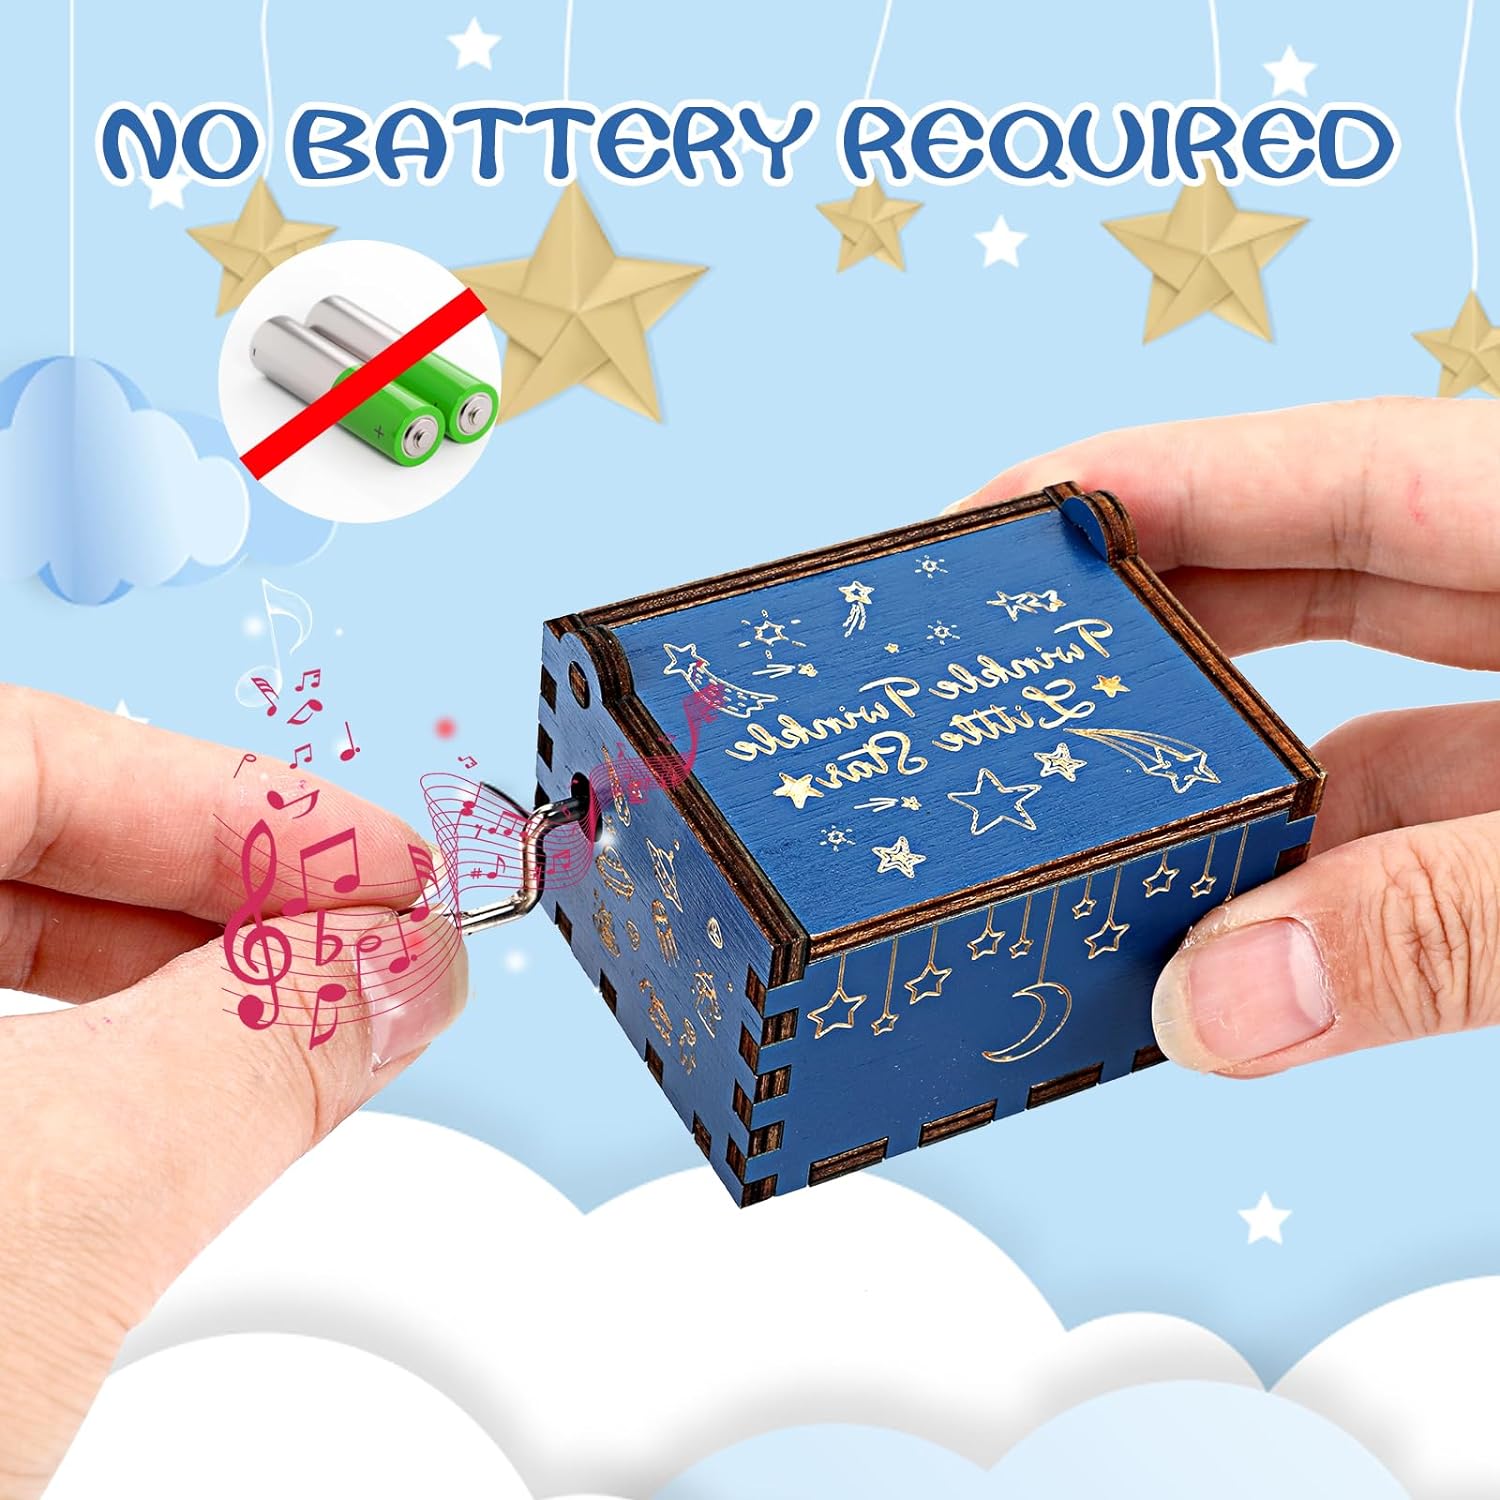 Twinkle Twinkle Little Star Wooden Music Box Vintage Engraved Hand-Operated Musical Box